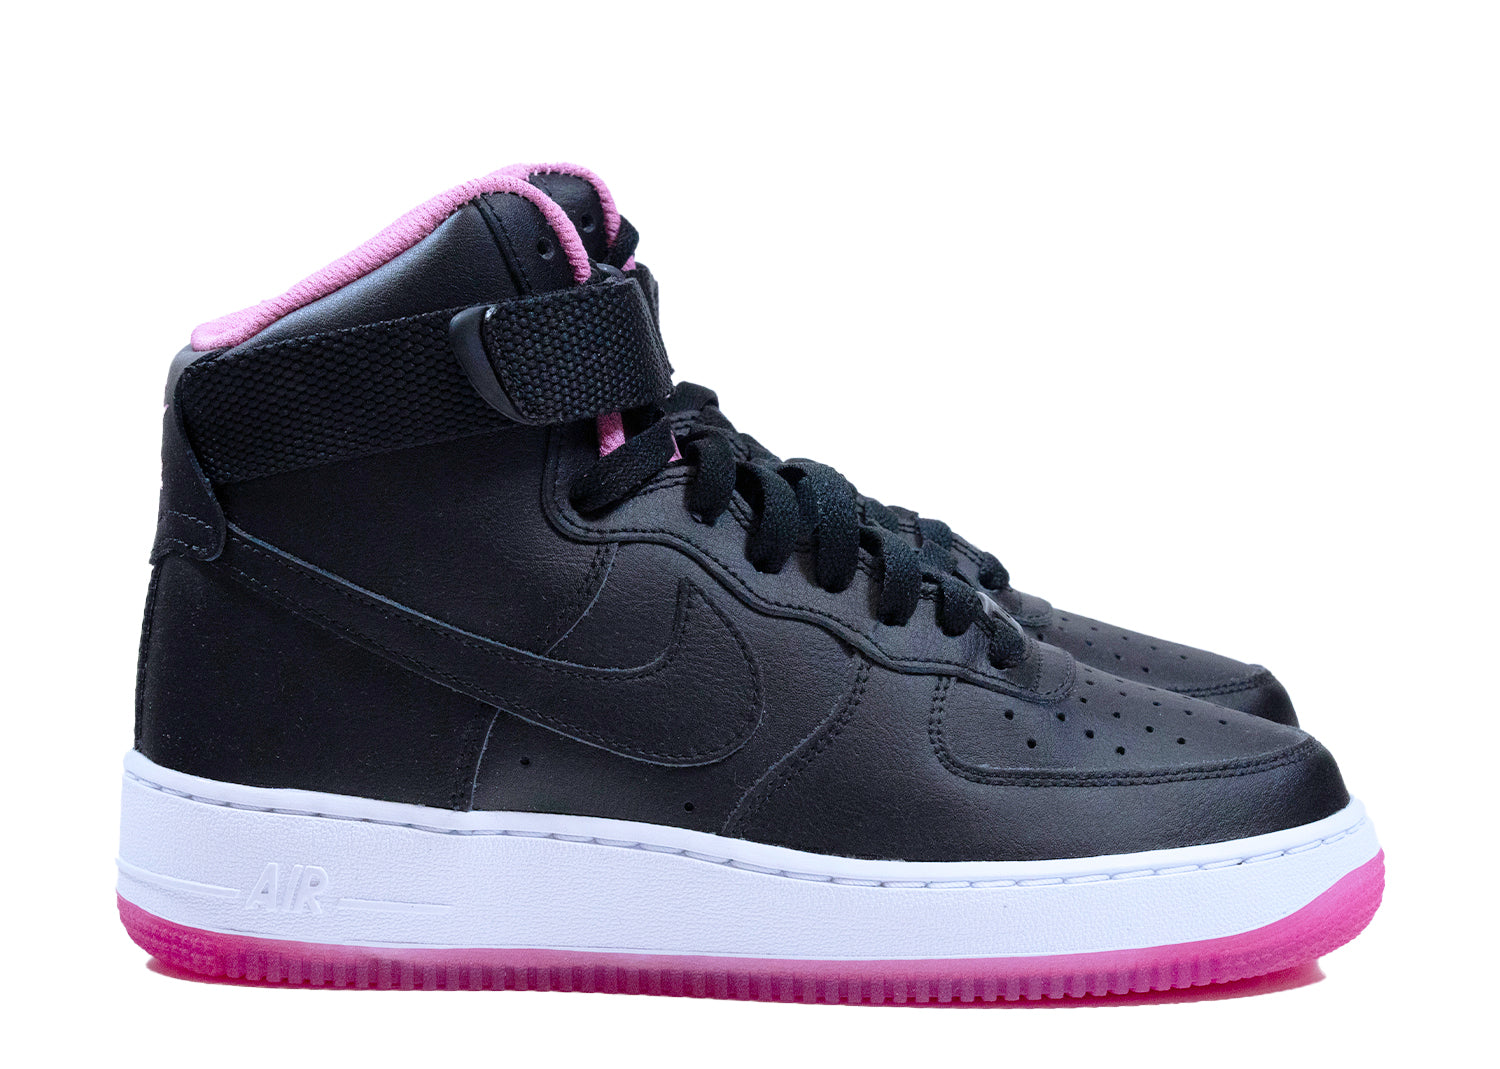 Second Chance - nrg Nike Air Force 1 High ID Black/pink - 38,5 | NEW